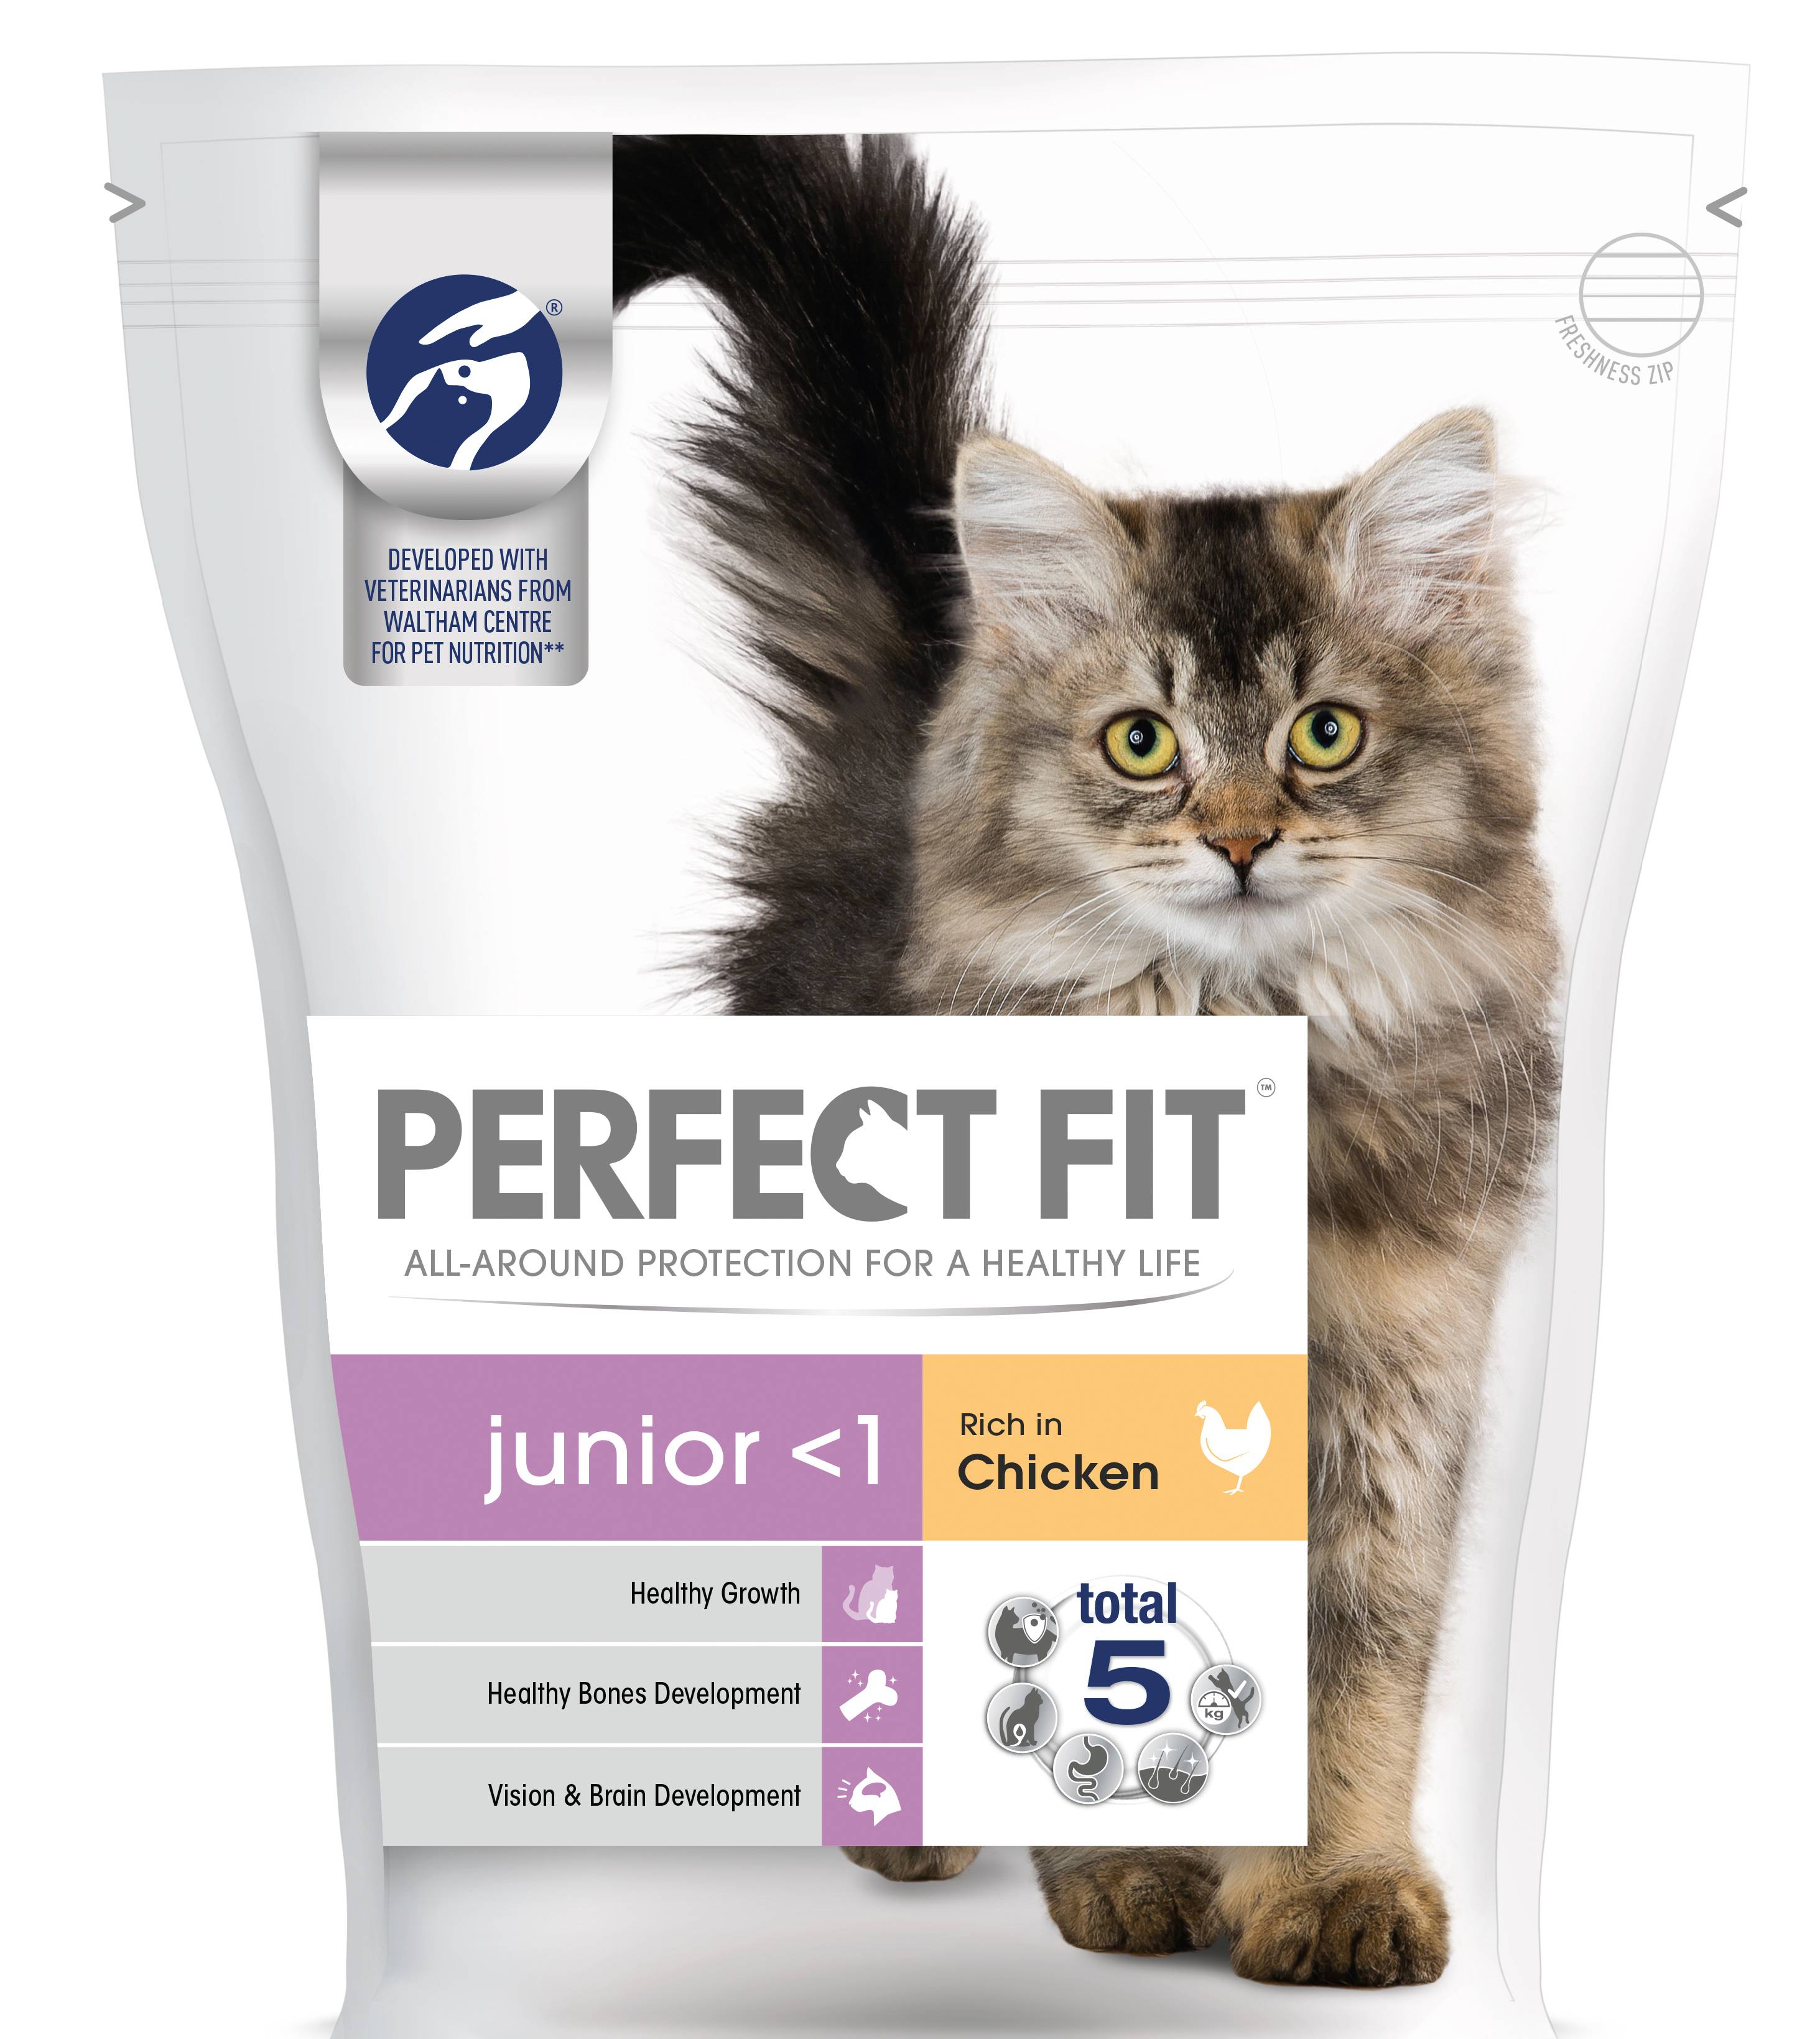 Mars Petcare launches 'Perfect Fit' pet food range